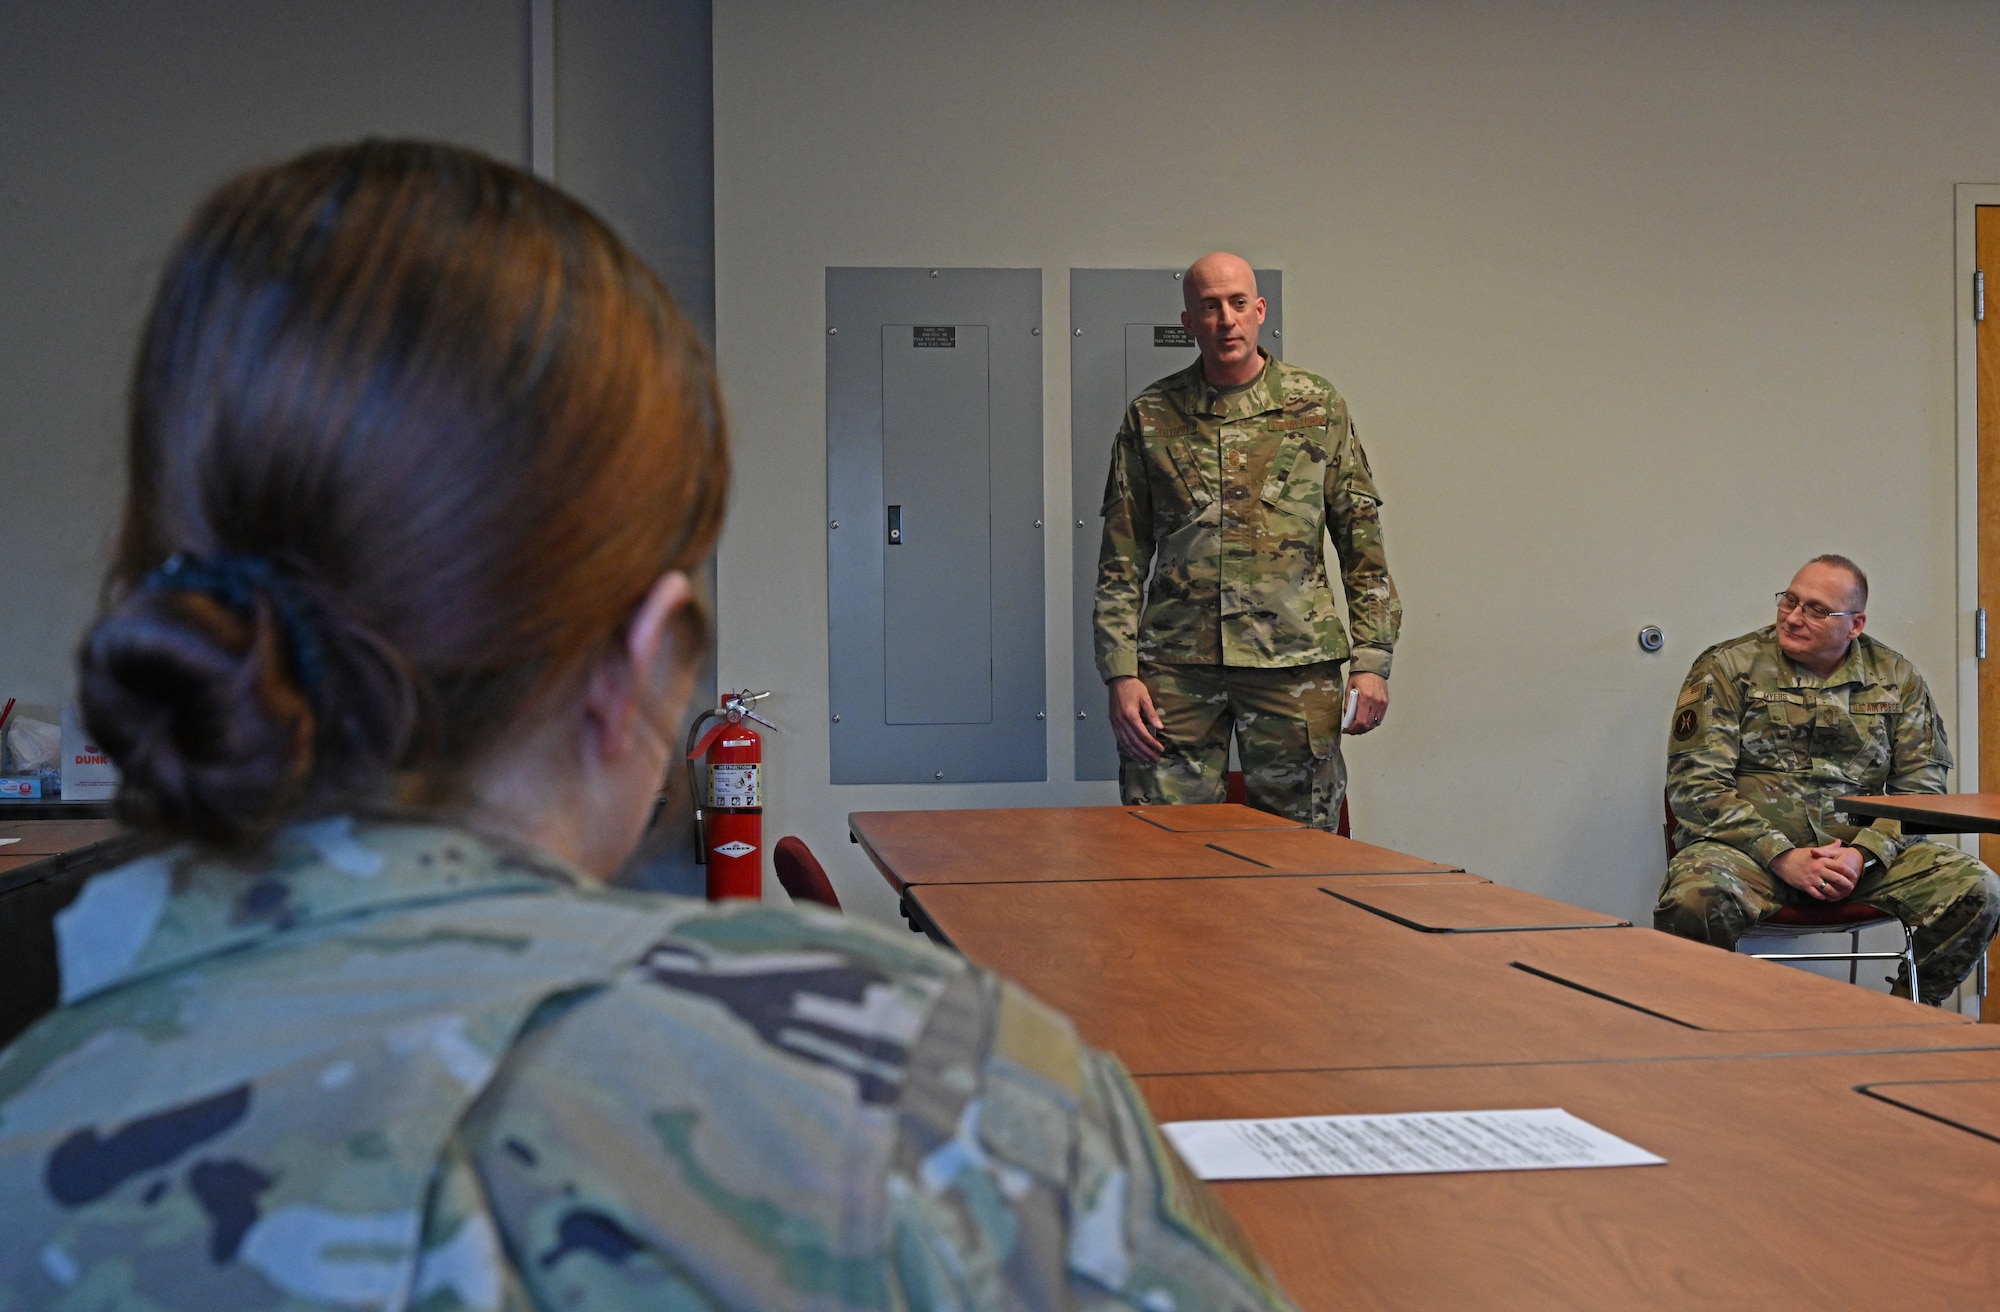 Chief Master Sgt. James Bottorff, 175th Mission Support Group superintendent, talks to Airmen during the 175th Wing's first additional duty first sergeant's symposium at Warfield Air National Guard Base at Martin State Airport, Middle River, Md., Dec. 2, 2020.